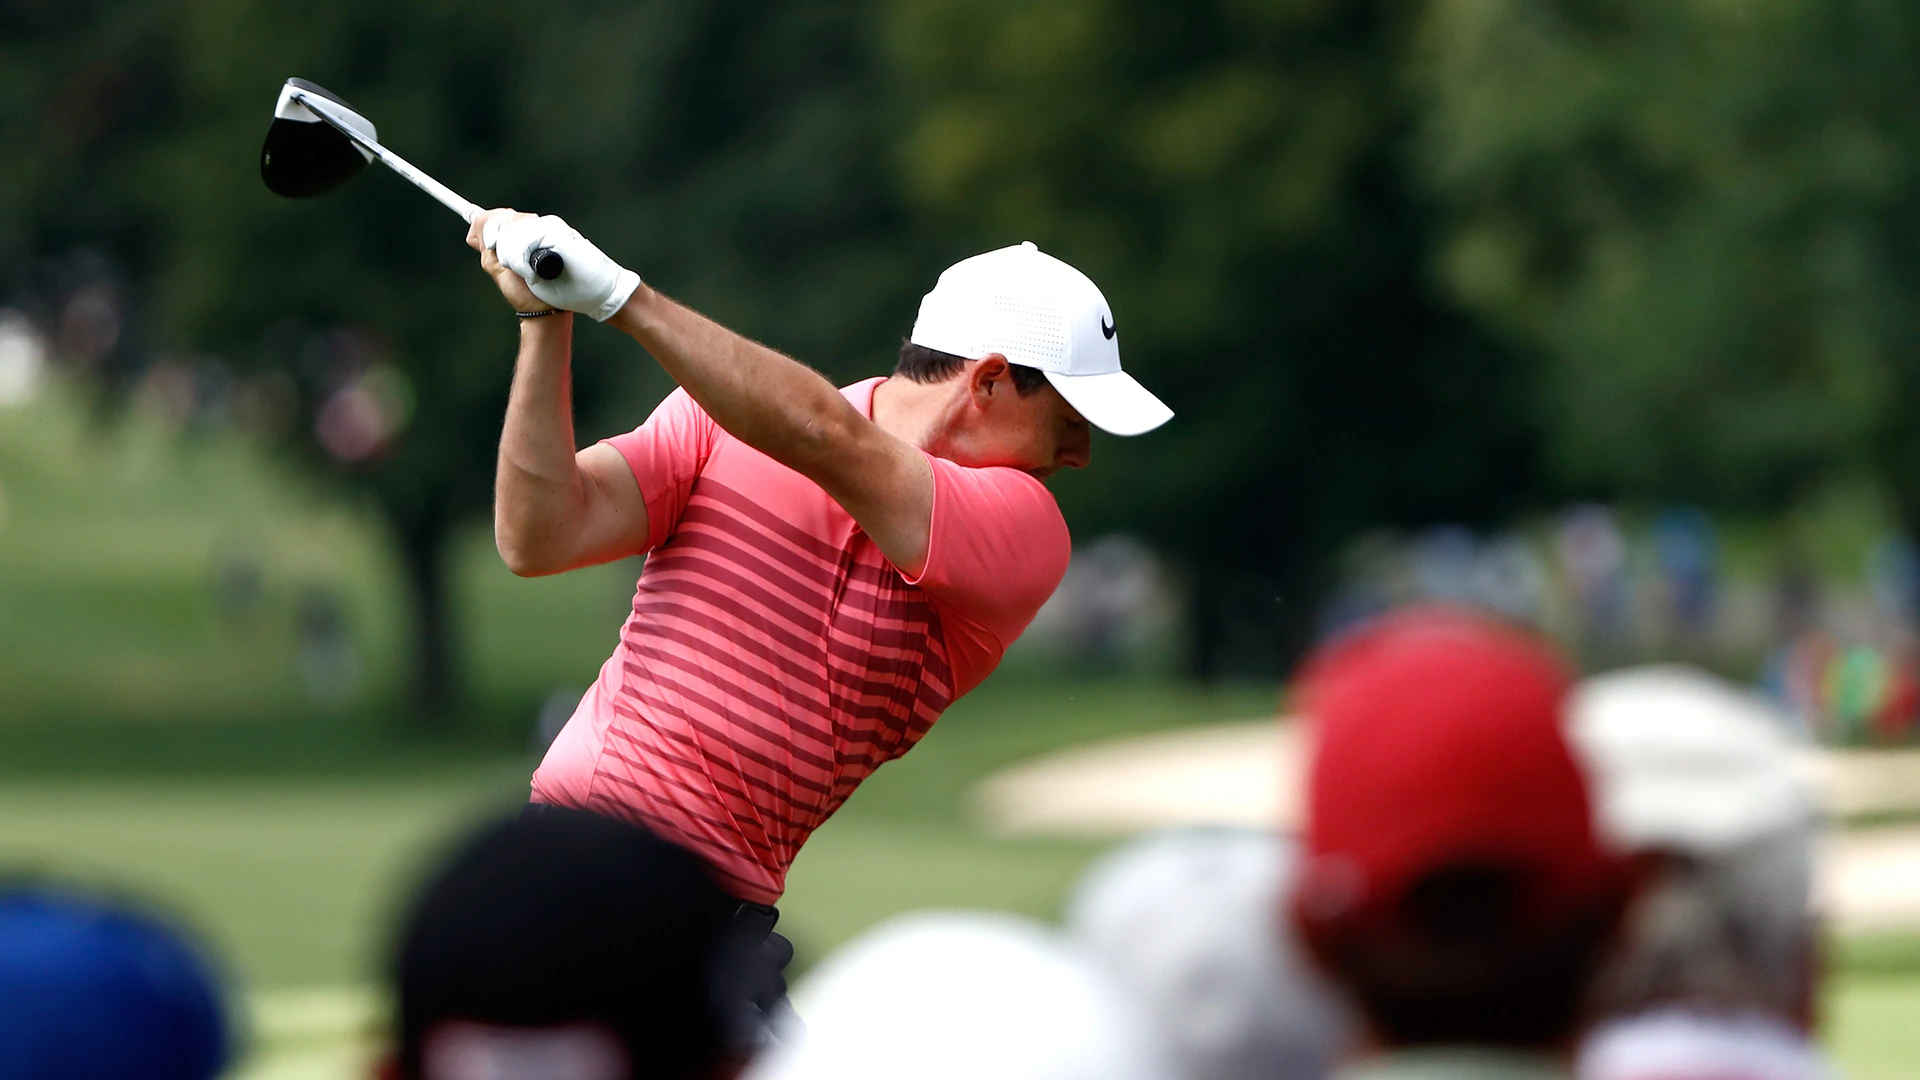 Long and strong: McIlroy crushing his driver